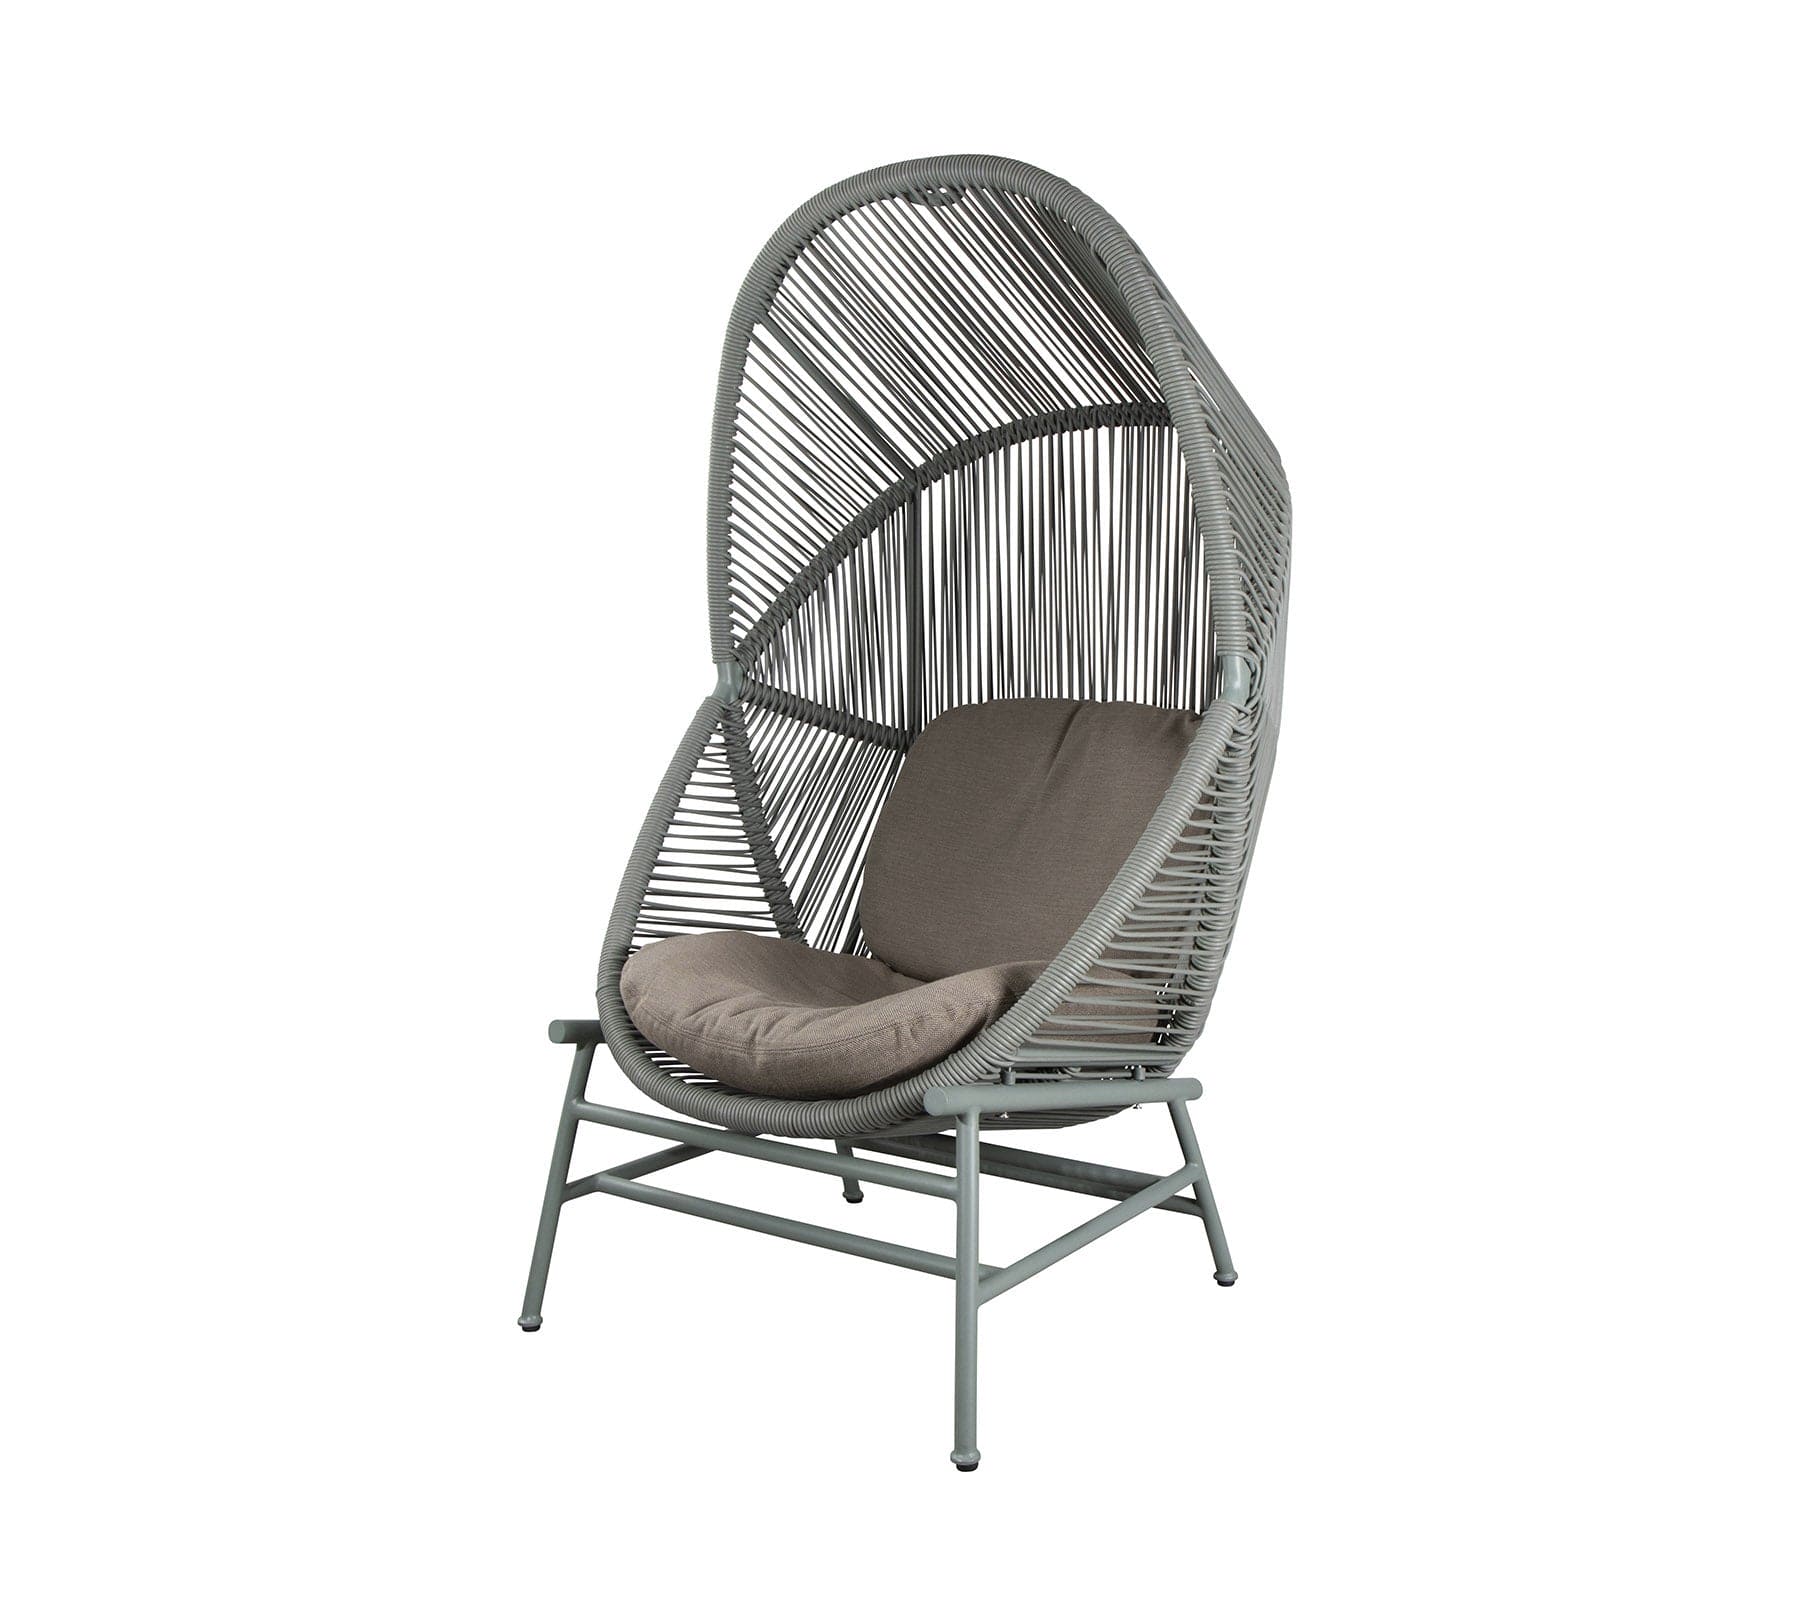 Boxhill's Hive Outdoor Hanging Chair Dusty green Frame with Taupe Cushion